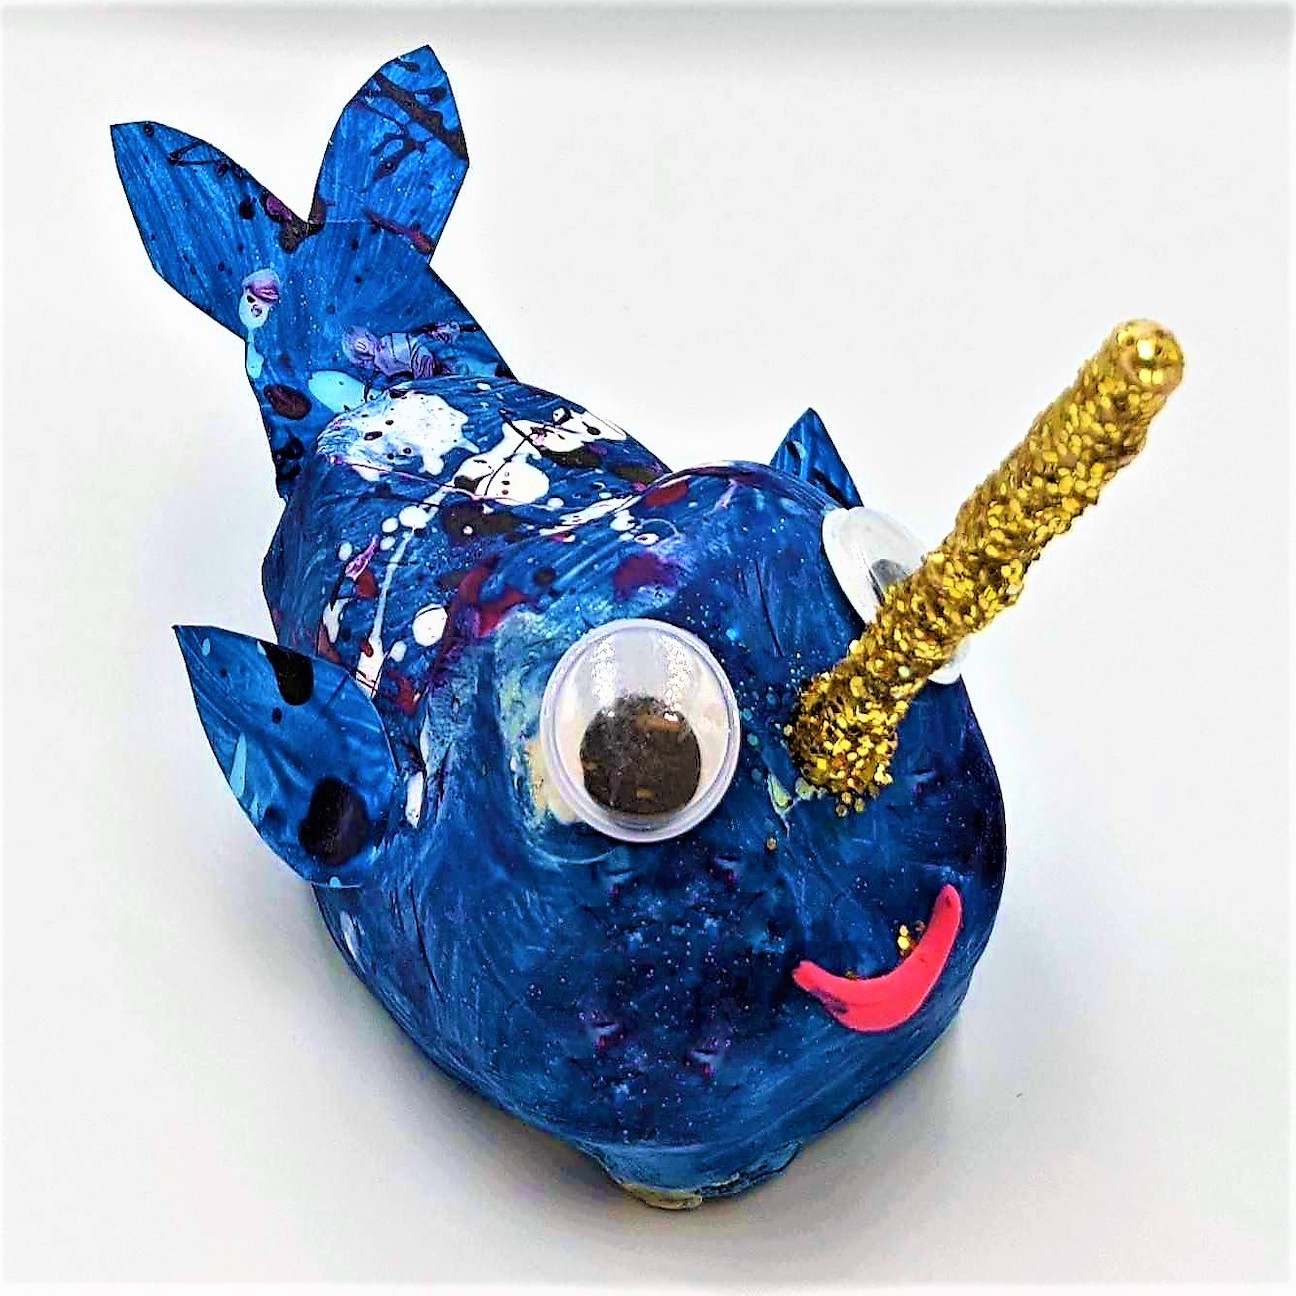 Kidcreate Studio - Brownsville, Nifty Narwhal Art Project